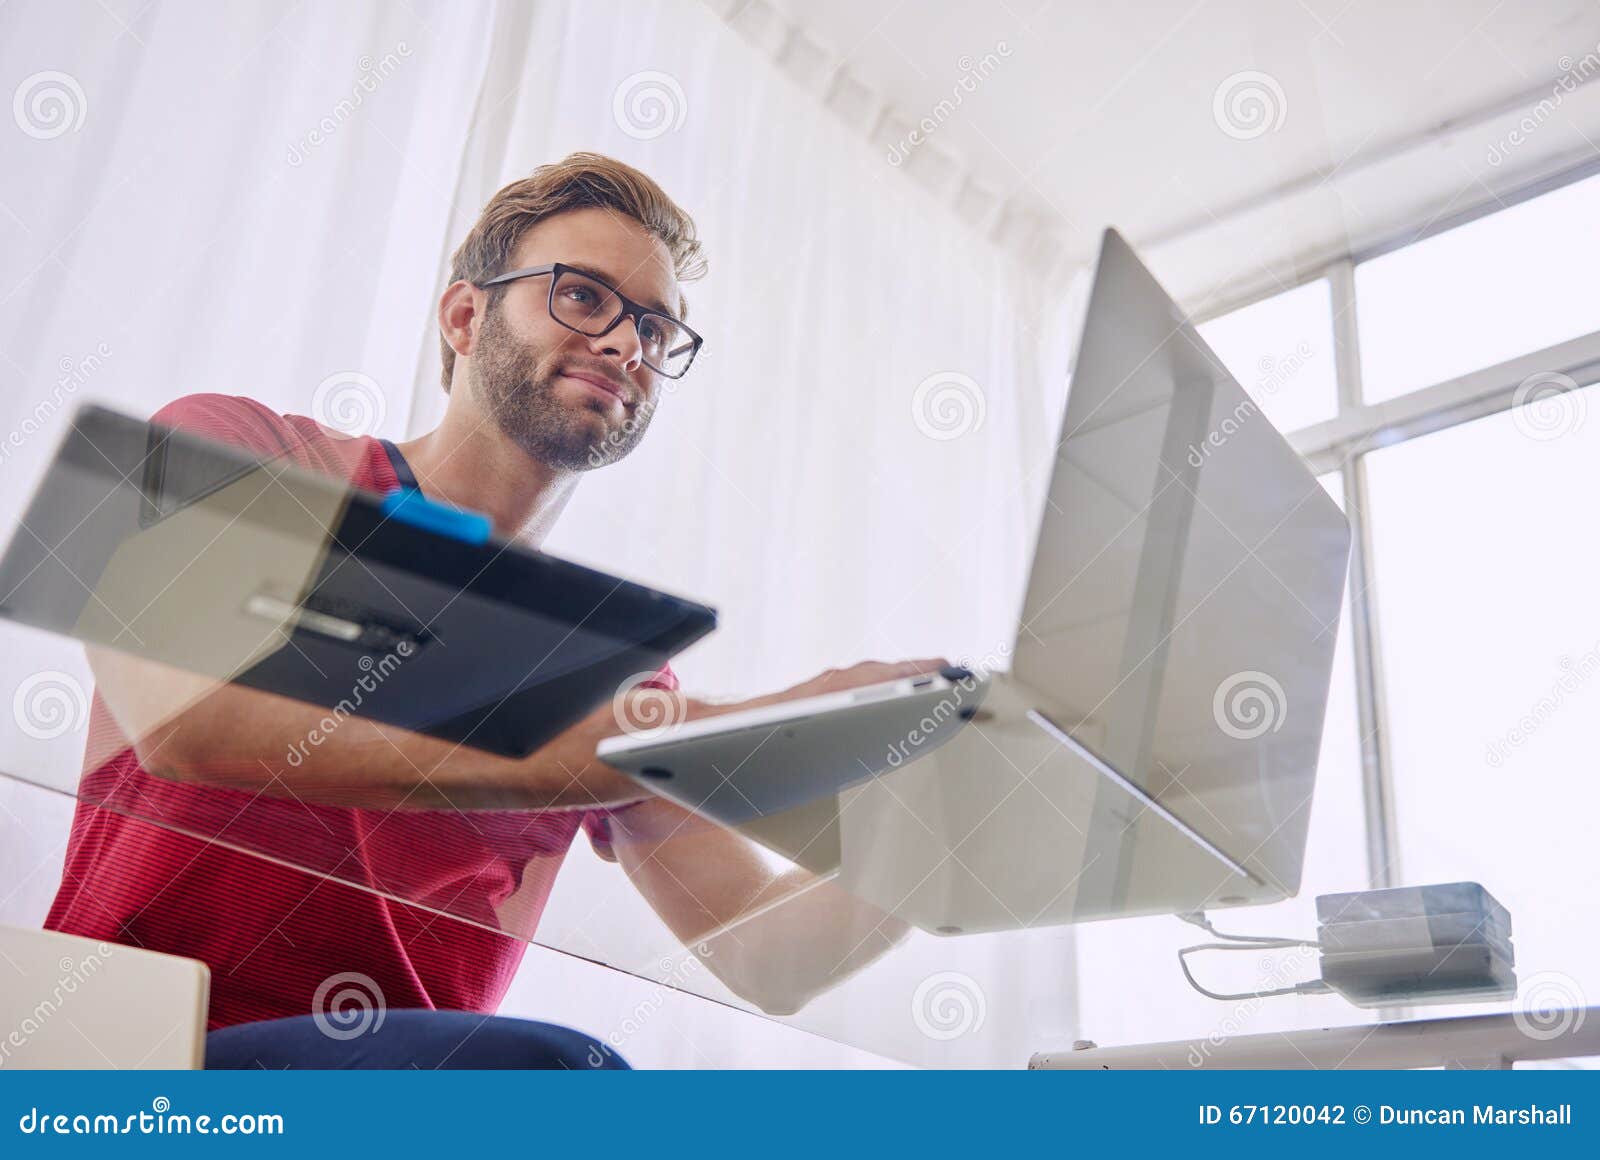 Man At Glass Desk Shot From Below Stock Photo Image Of Study